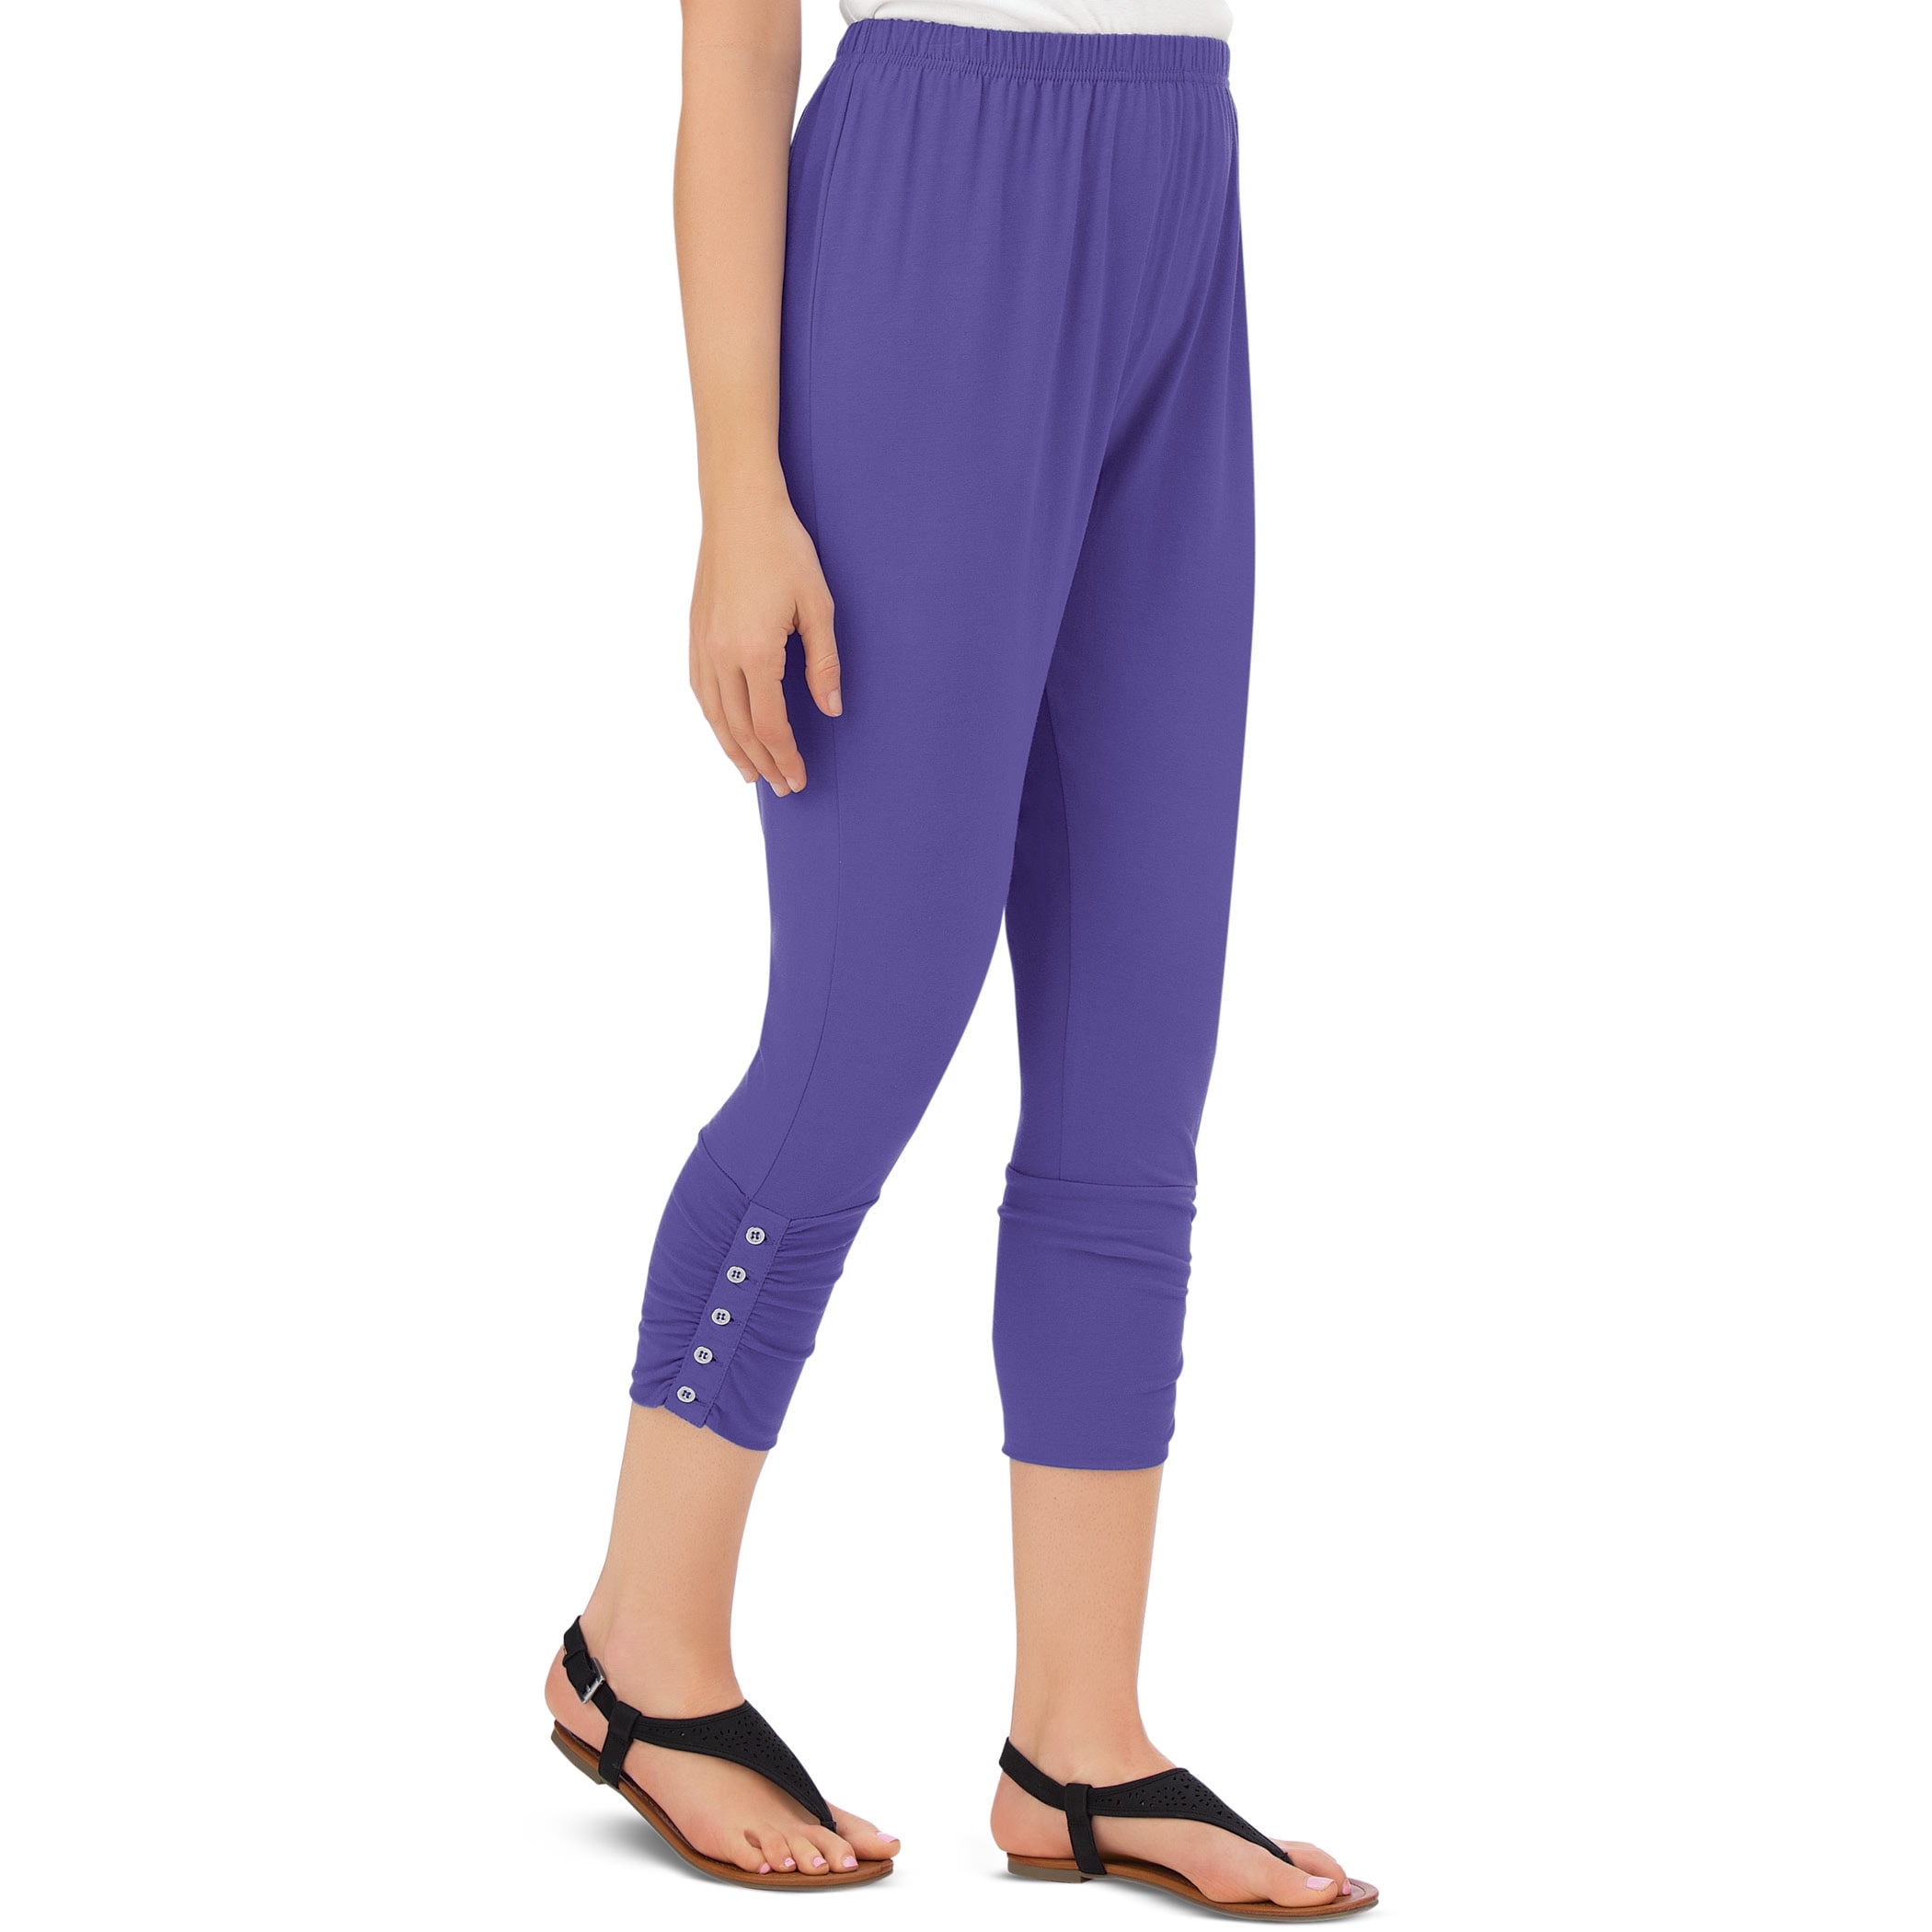 Women's Button Accent Cinched Capri Leggings for Pairing with